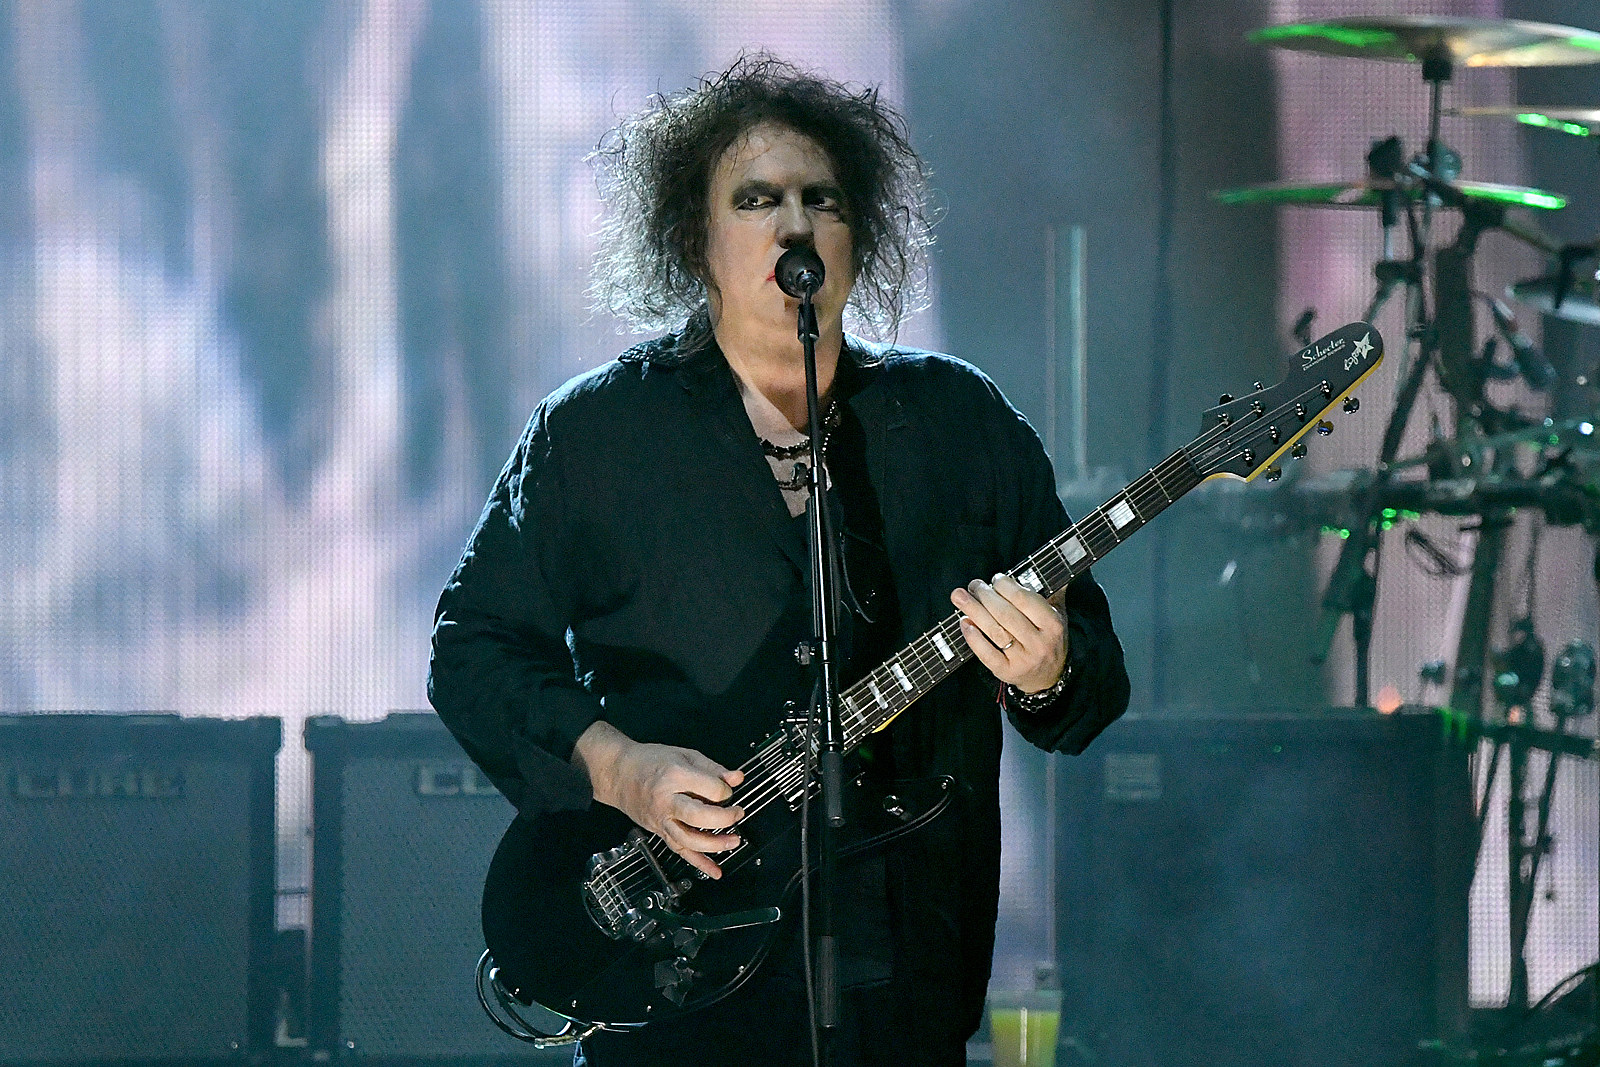 New Music From the Cure Is in the Wings